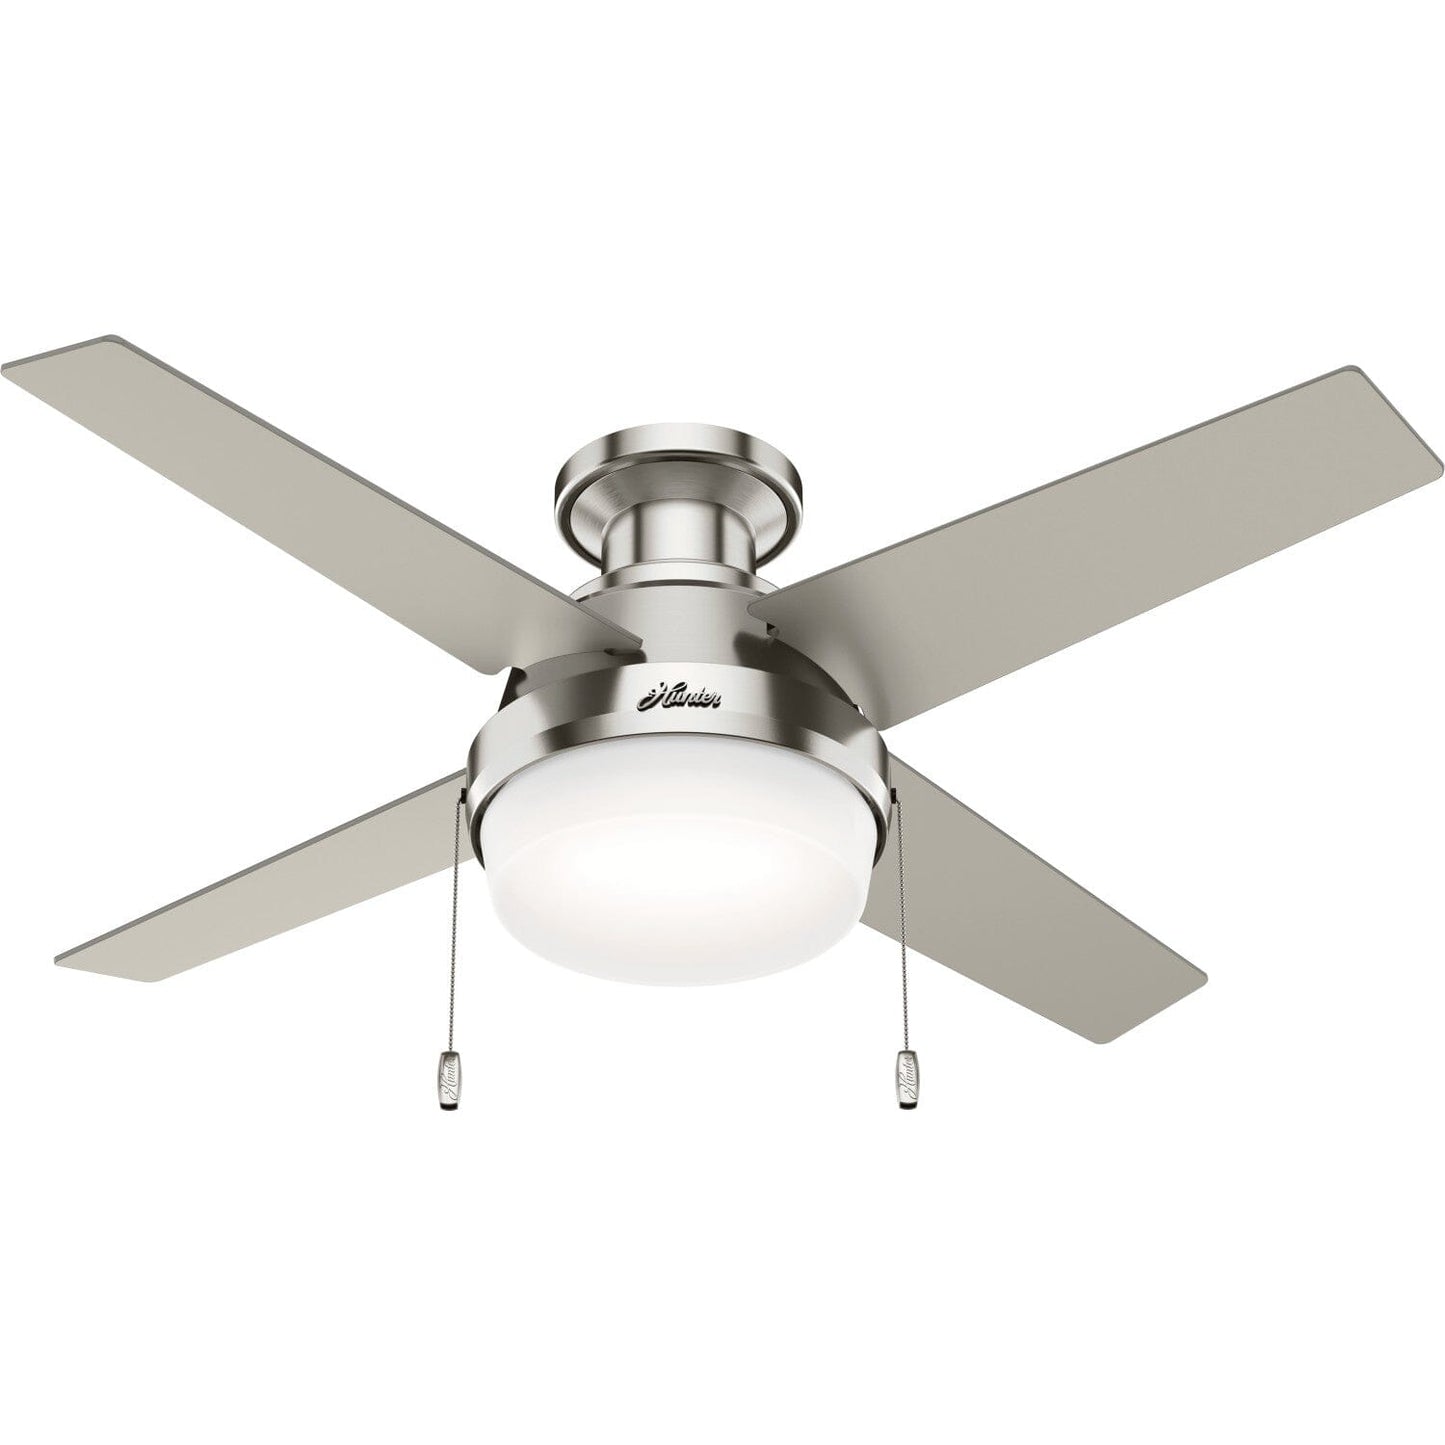 Ristrello Low Profile with LED 44 Ceiling Fans Hunter Brushed Nickel - Matte Nickel 